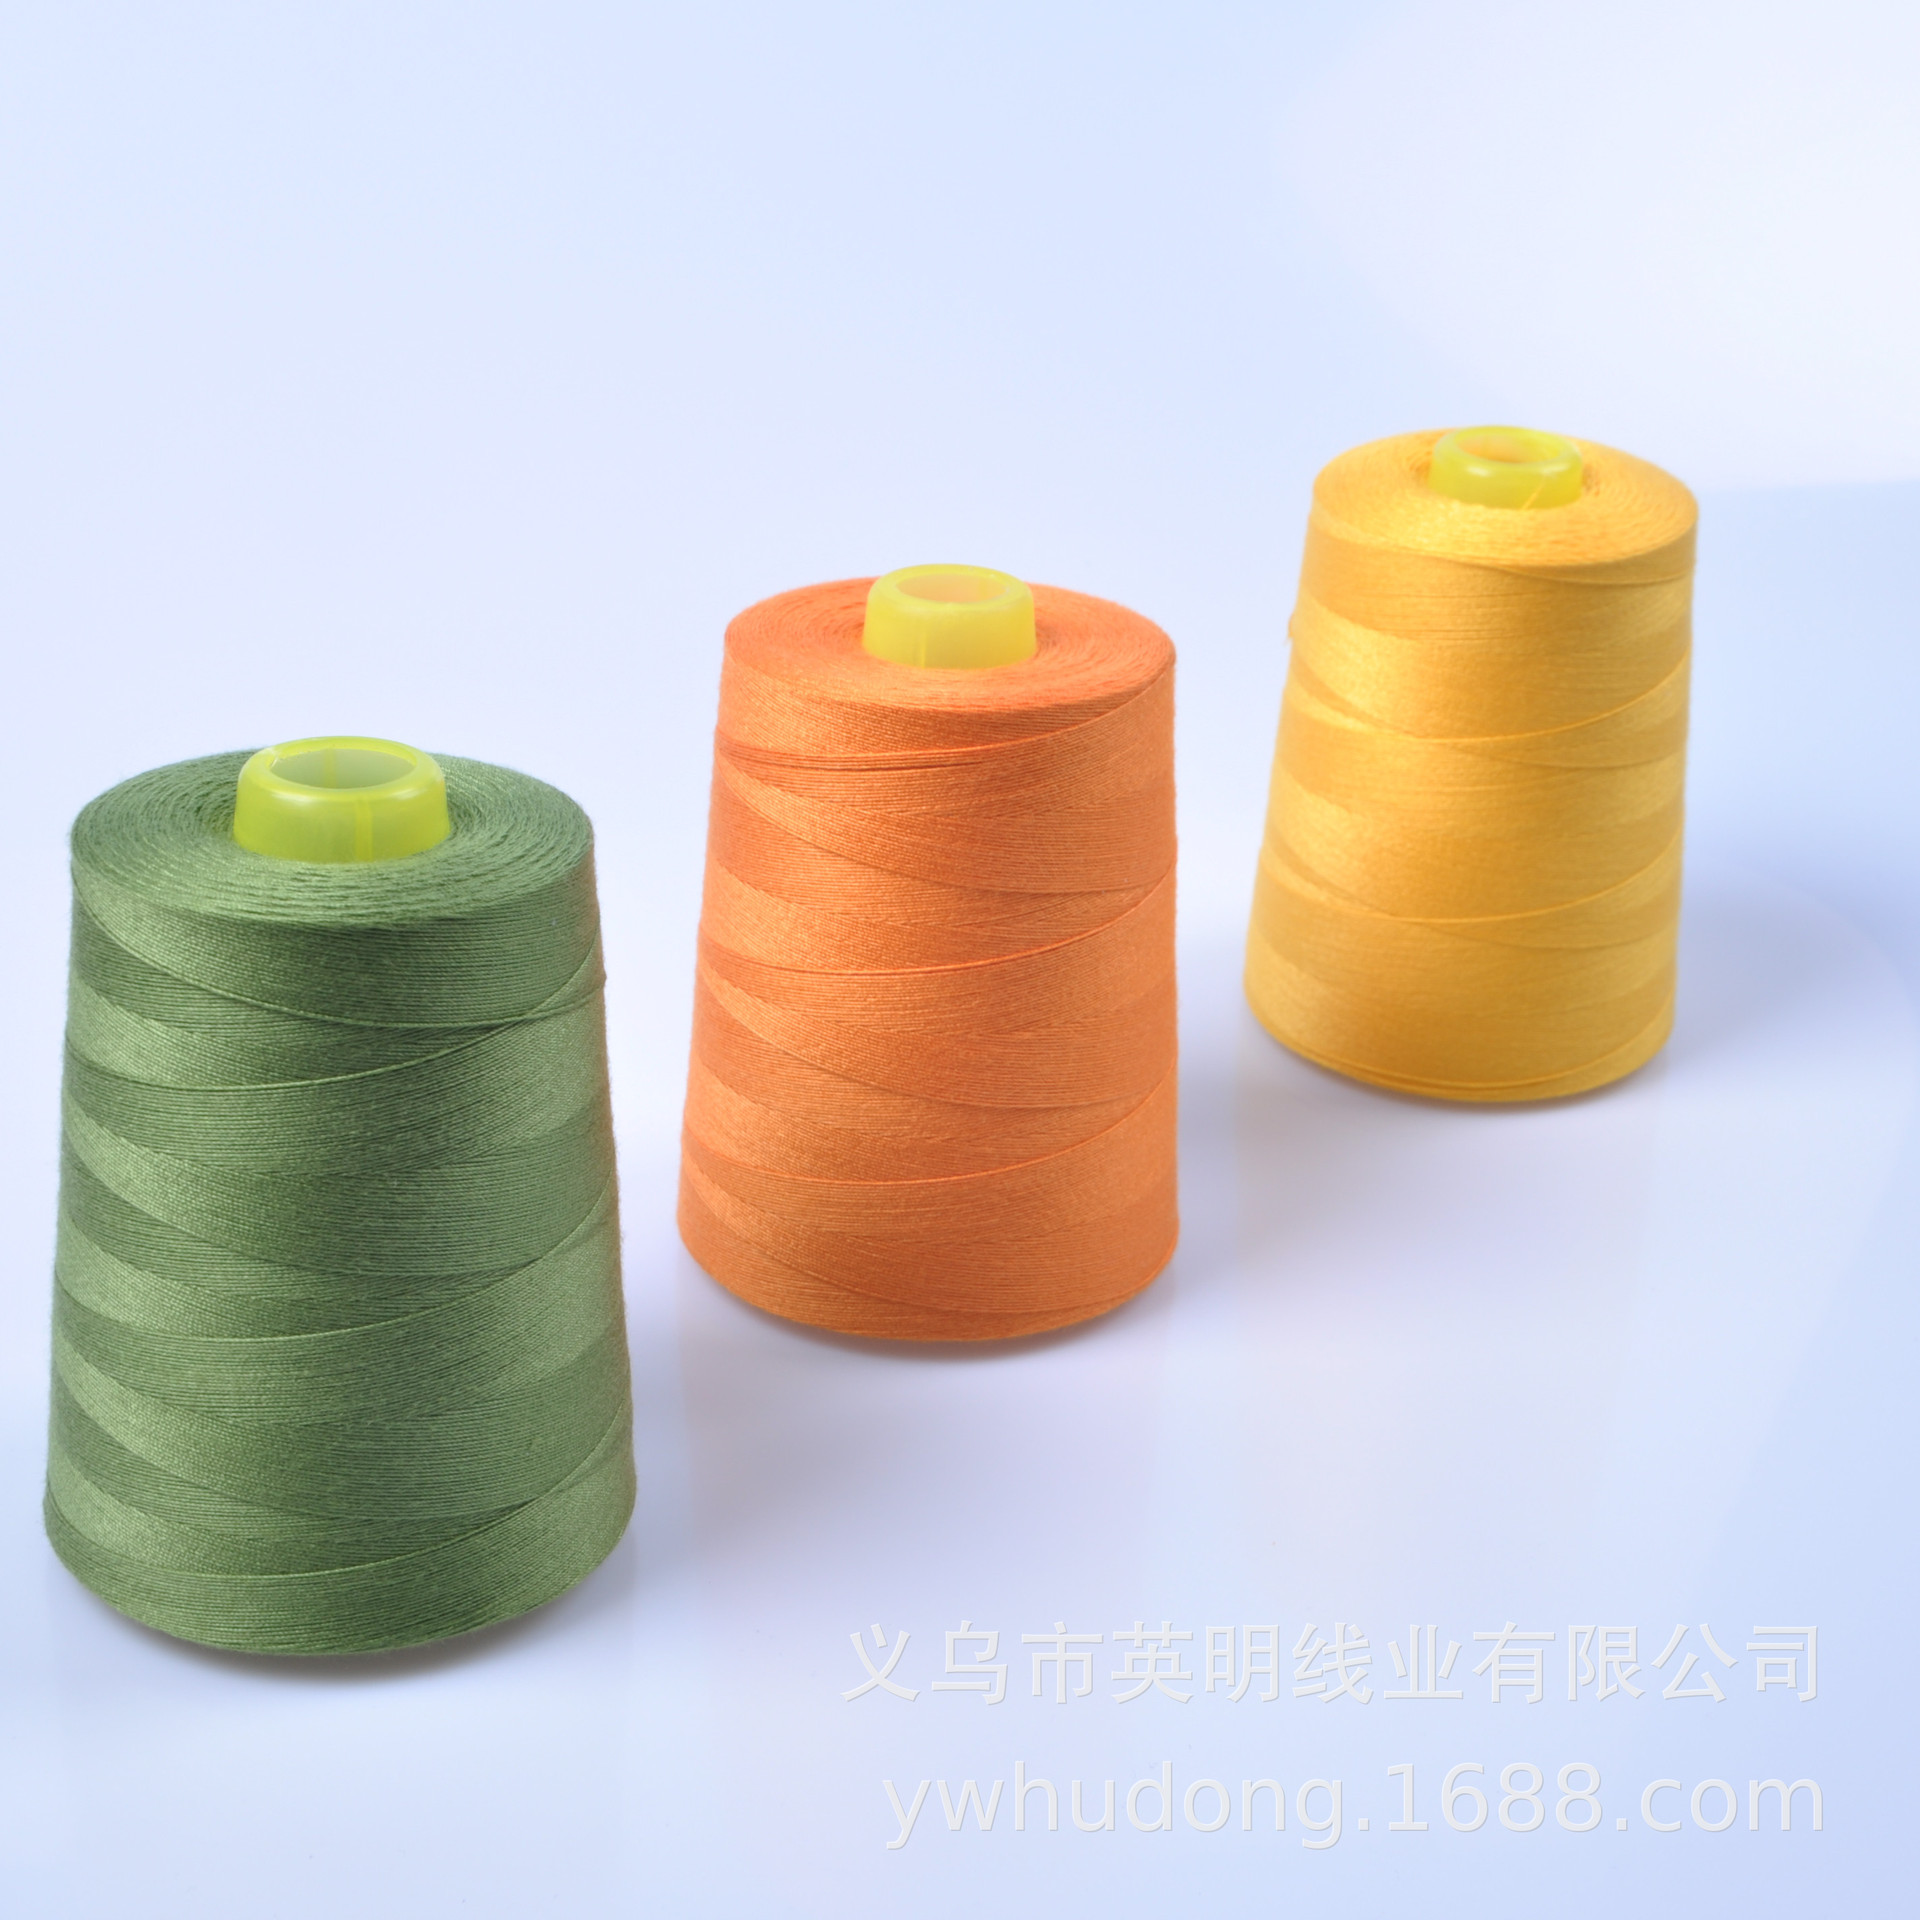 Yingming Thread Industry [Factory Direct Sales] Hudong Brand High-Quality High-Speed Polyester Sewing Thread， 20/2 Size 4000